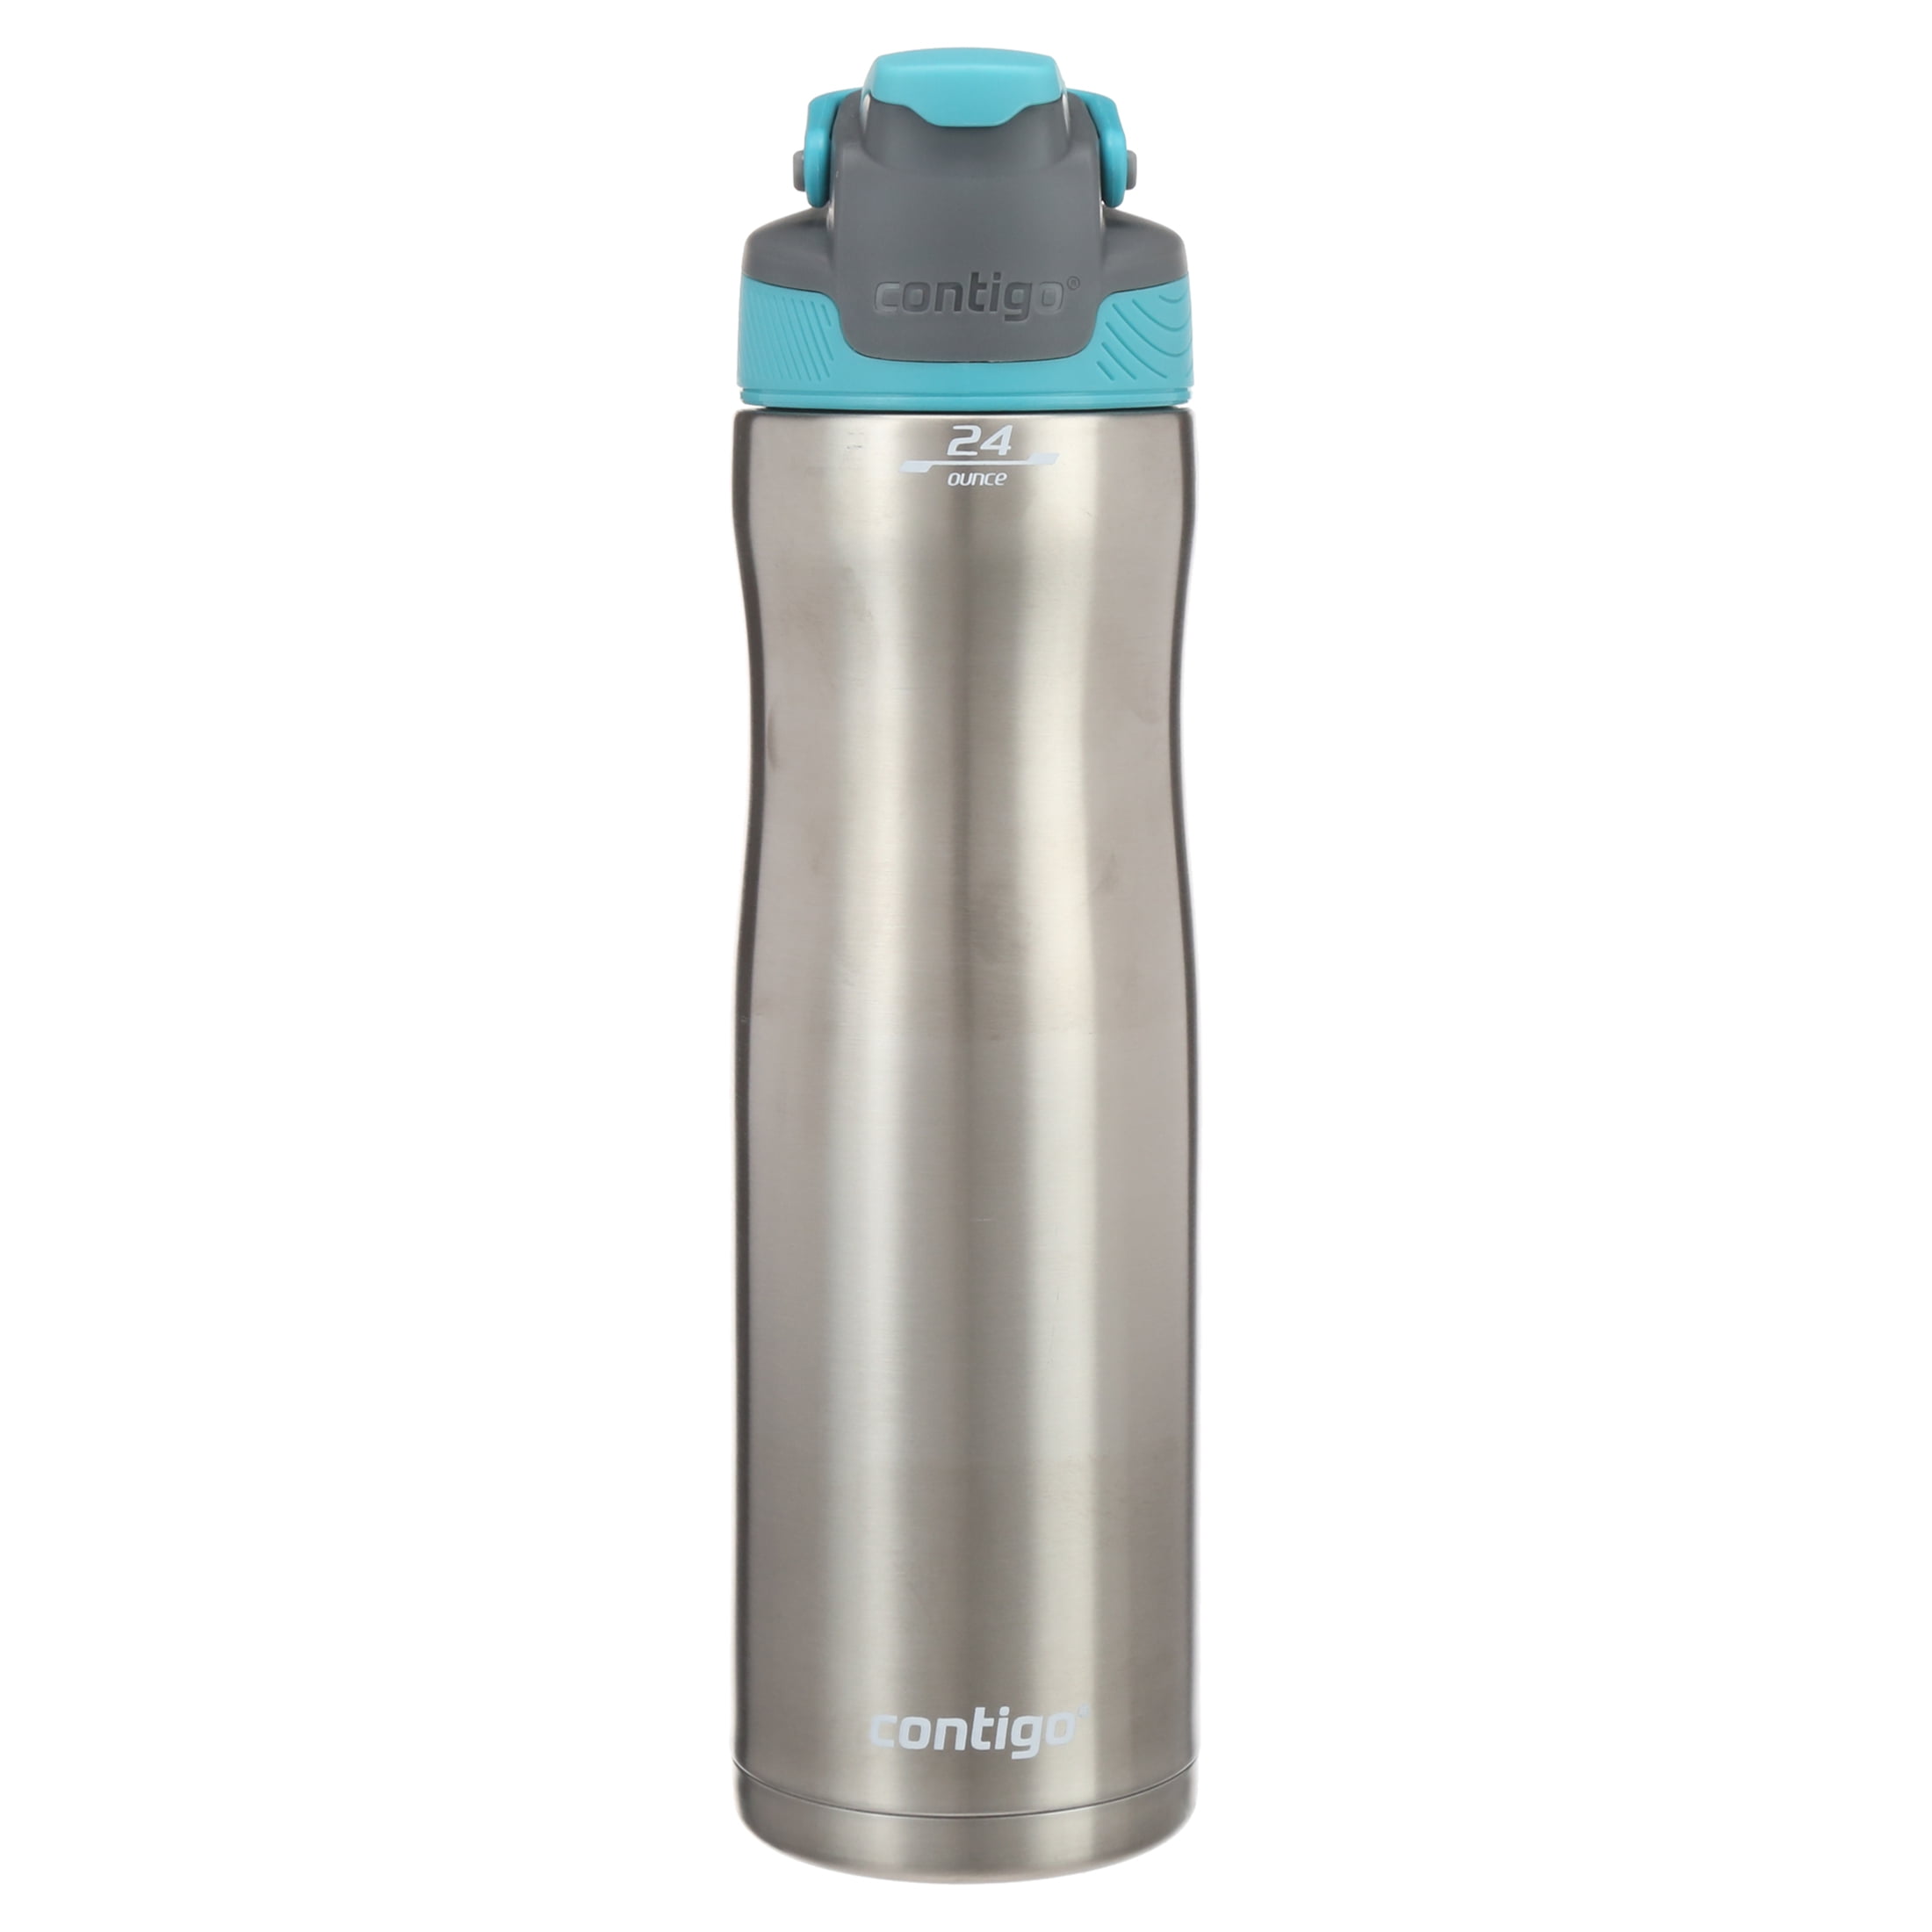 Contigo AUTOSEAL Chill Vacuum-Insulated Stainless Steel Water Bottle 24%Er  Berry%Er Berry%and Contigo AUTOSEAL Chill Vacuum-Insulated Stainless S 